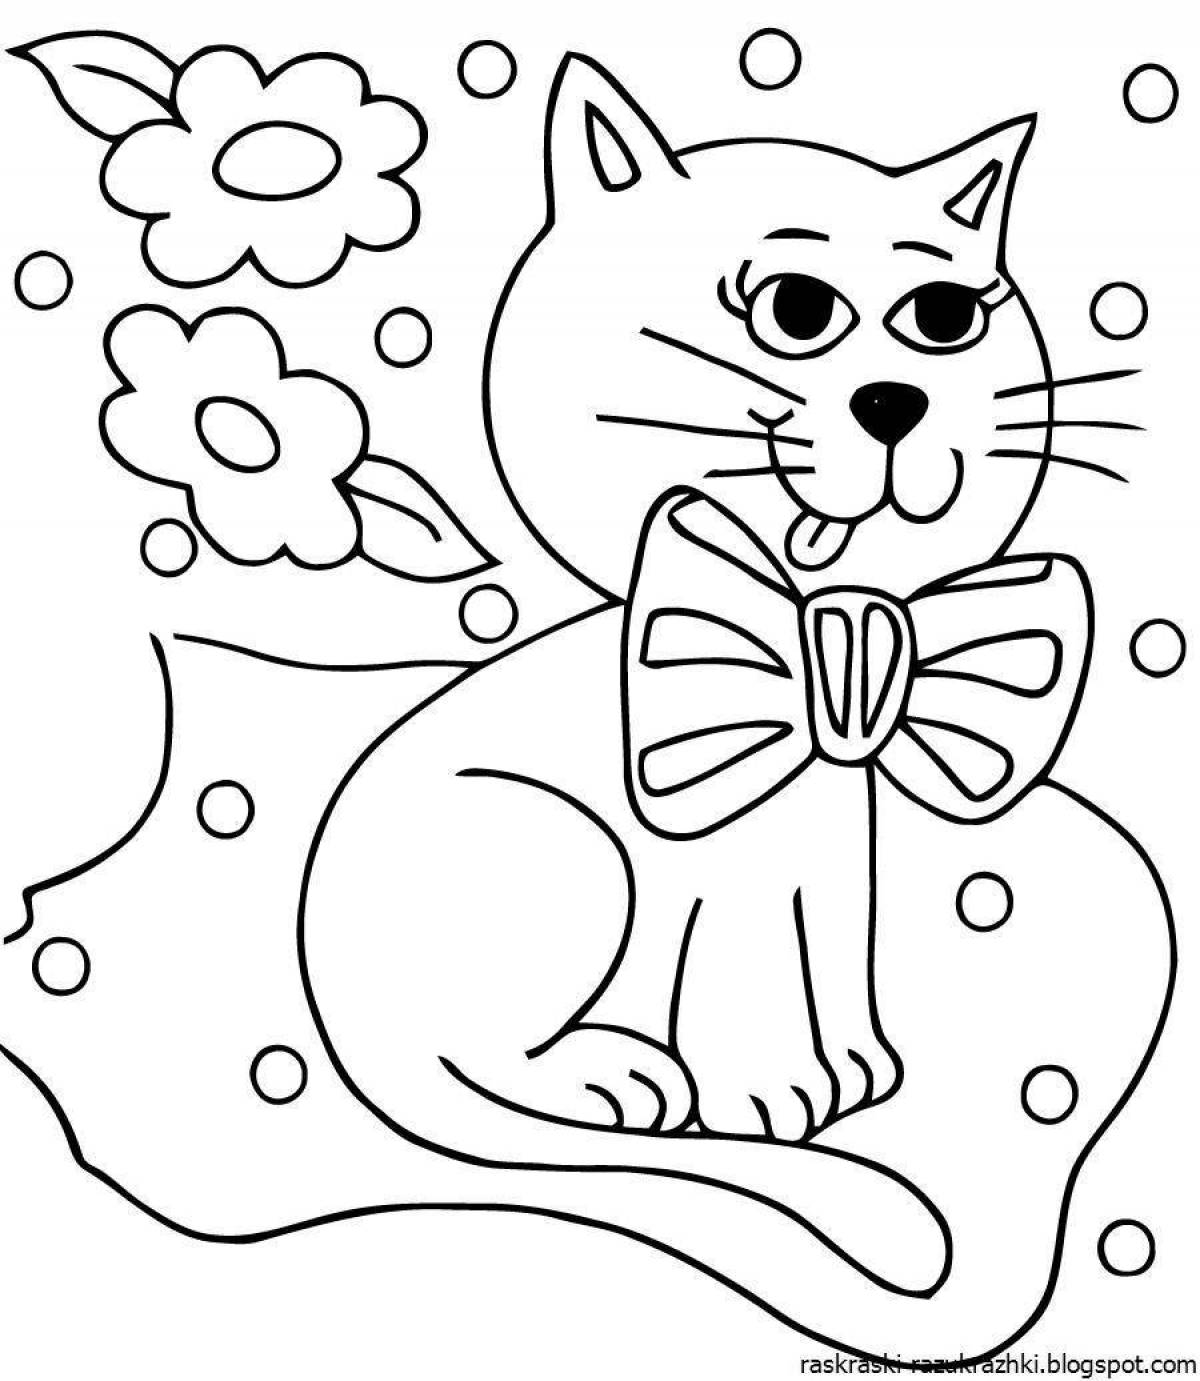 Joyful coloring for girls 7 years old cats